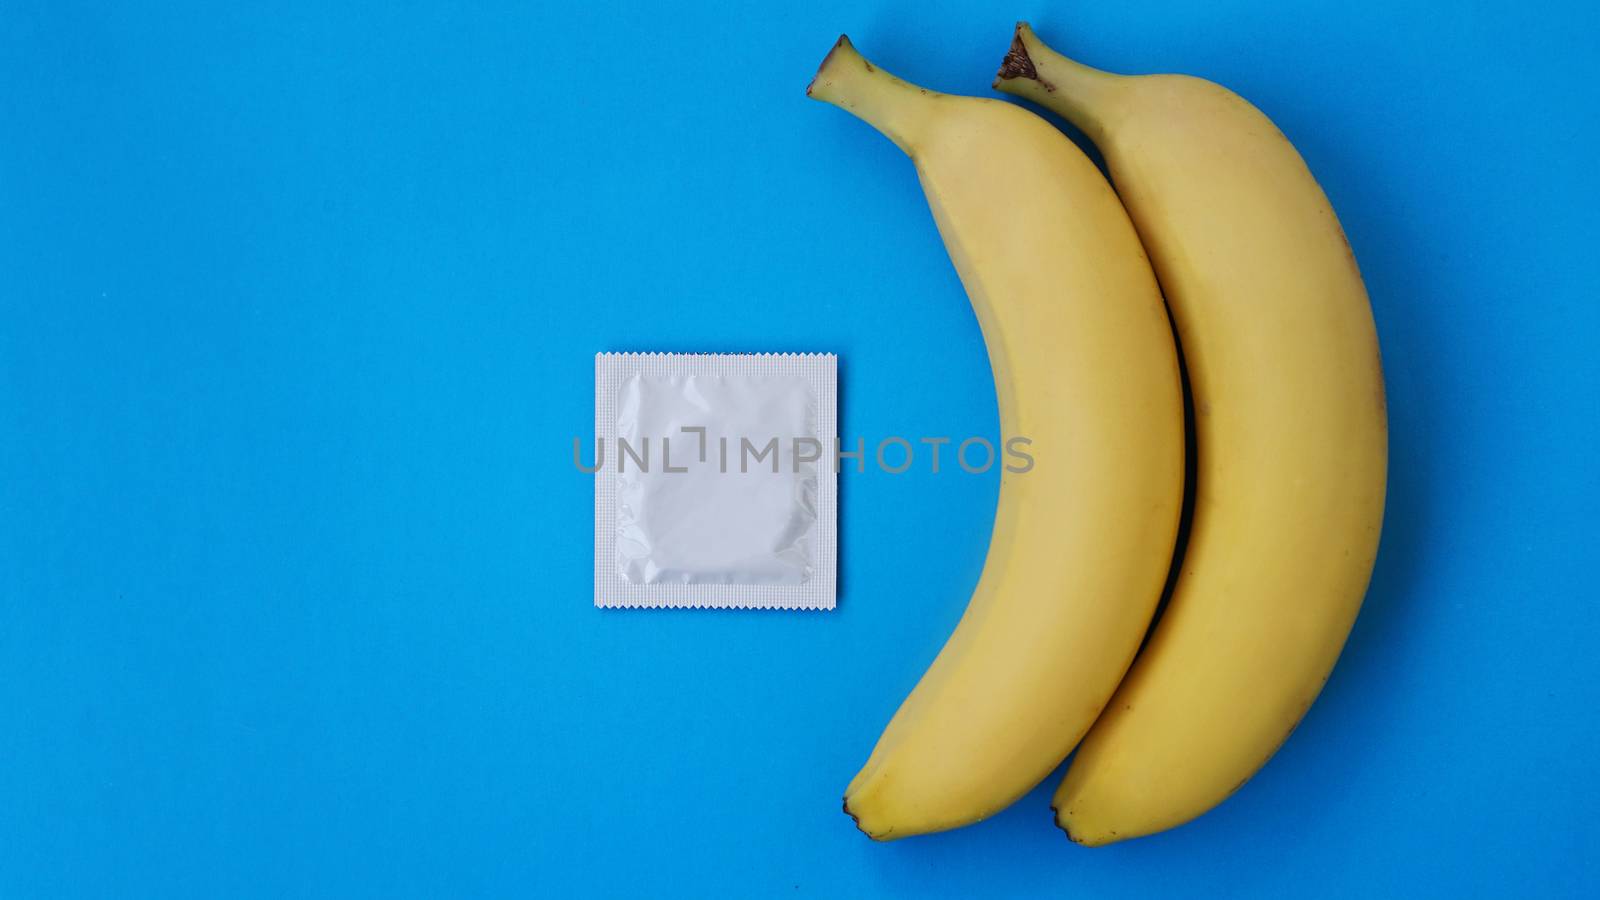 Condoms and two bananas together on blue background, the concept of contraceptives and the prevention of venereal diseases of same-sex marriage.